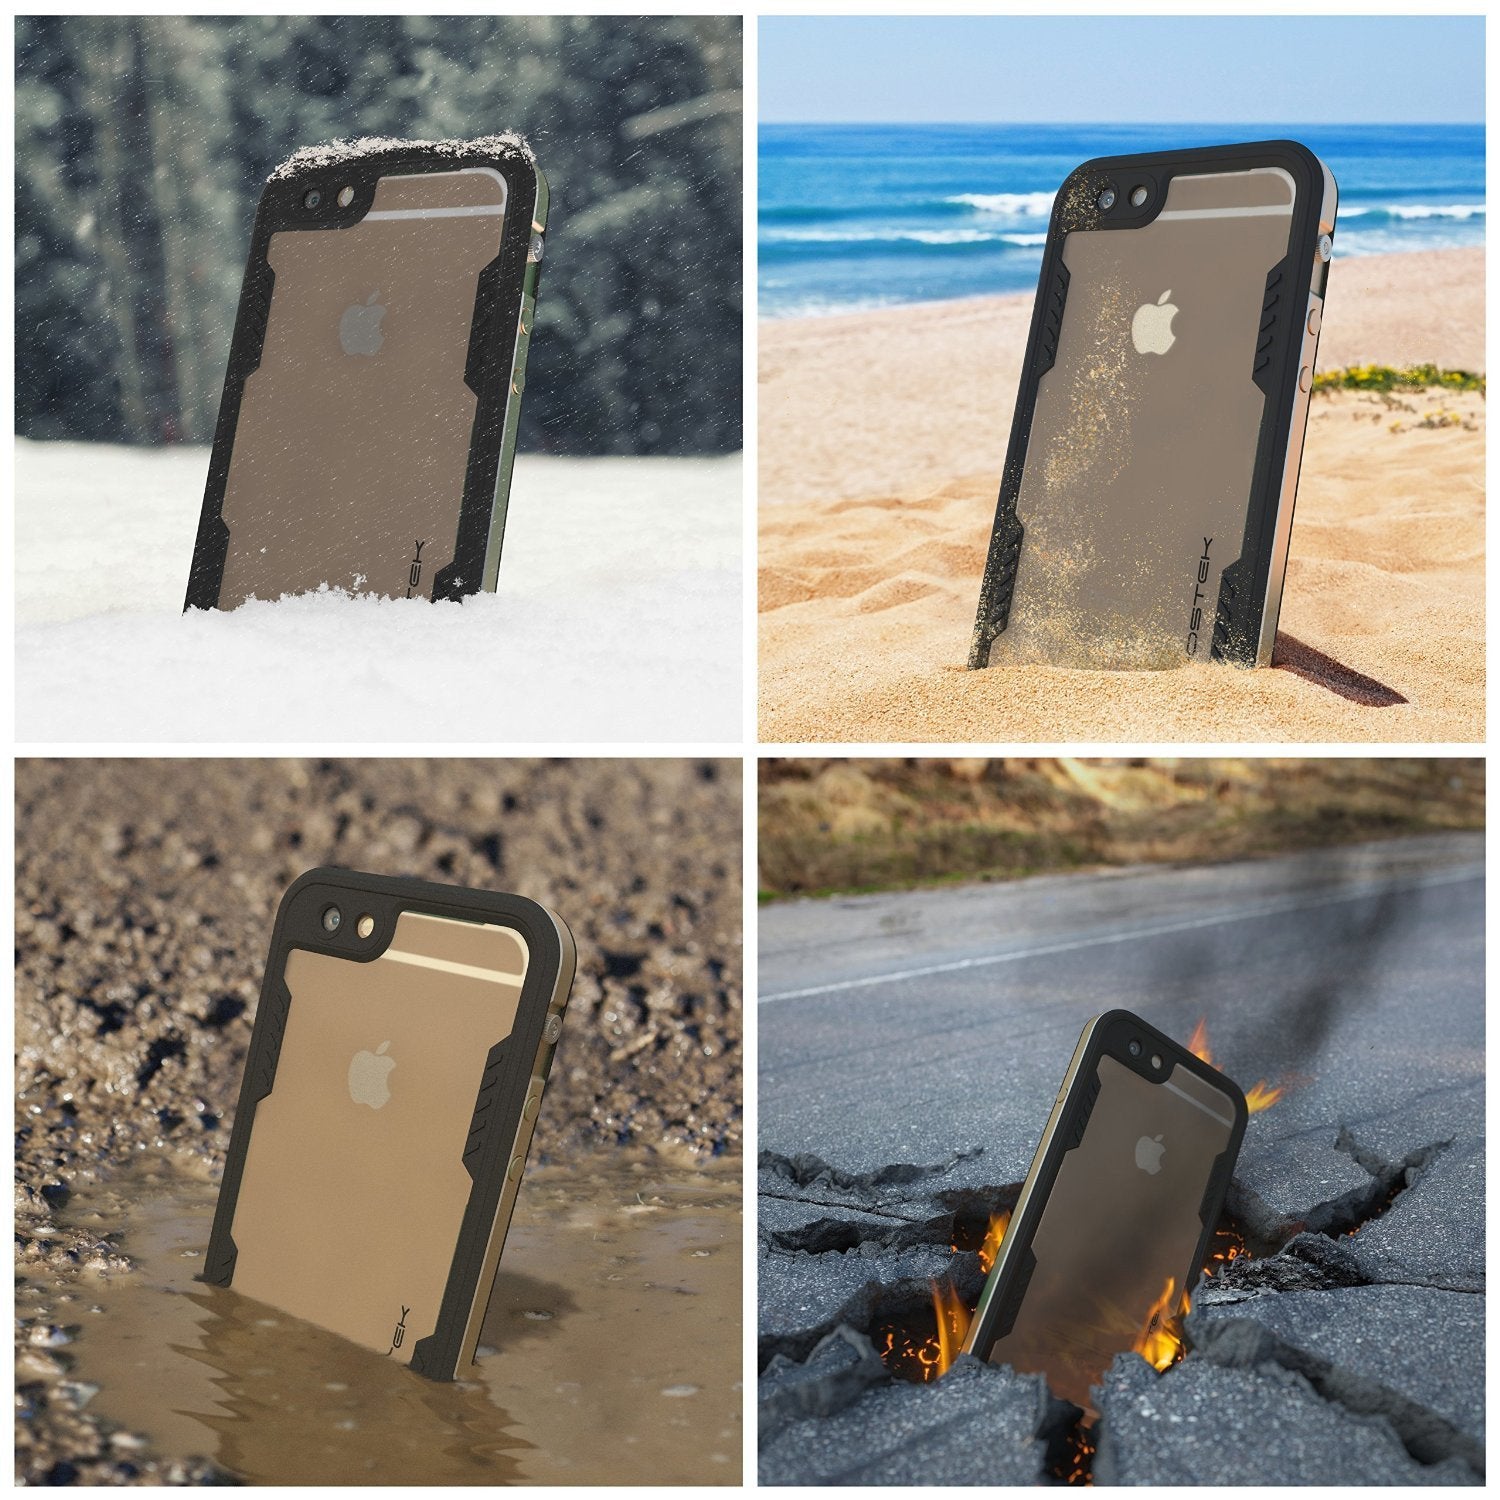 iPhone 6/6S Waterproof Case, Ghostek Atomic 2.0 Gold W/ Attached Screen Protector | Slim Fit